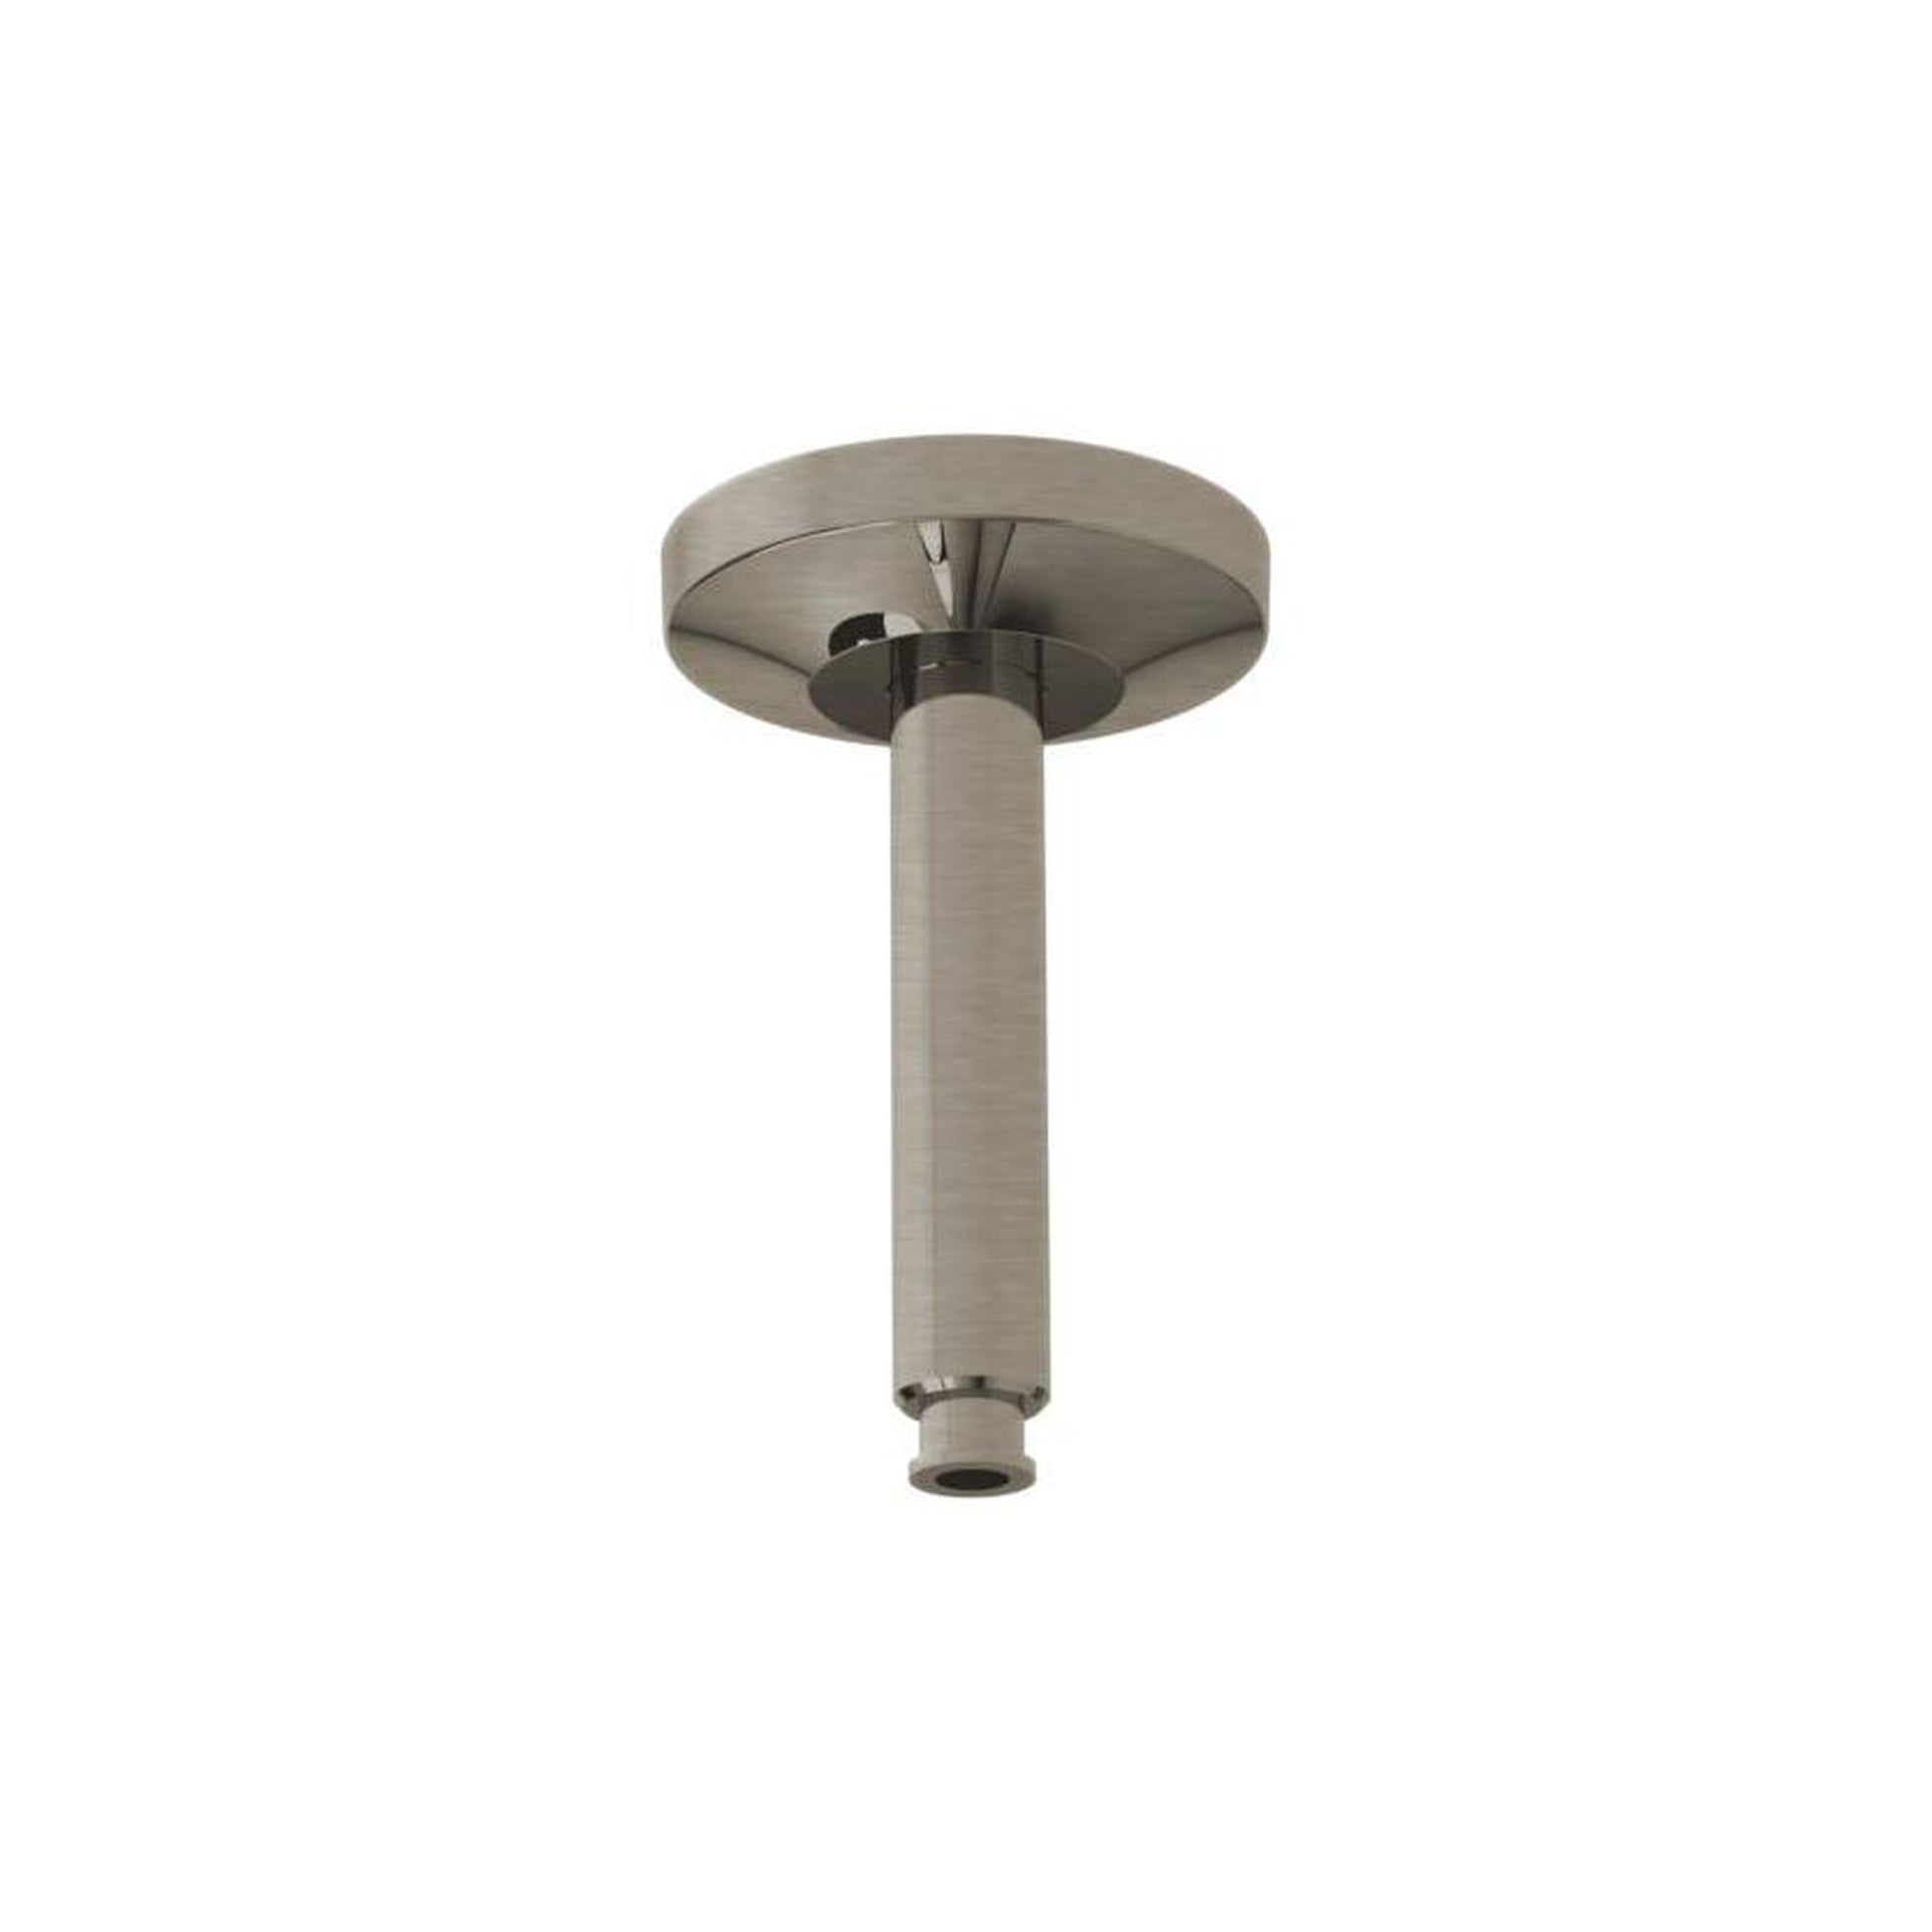 Toto 6” Rain Shower Arm Ceiling-Mnt Brushed Nickel